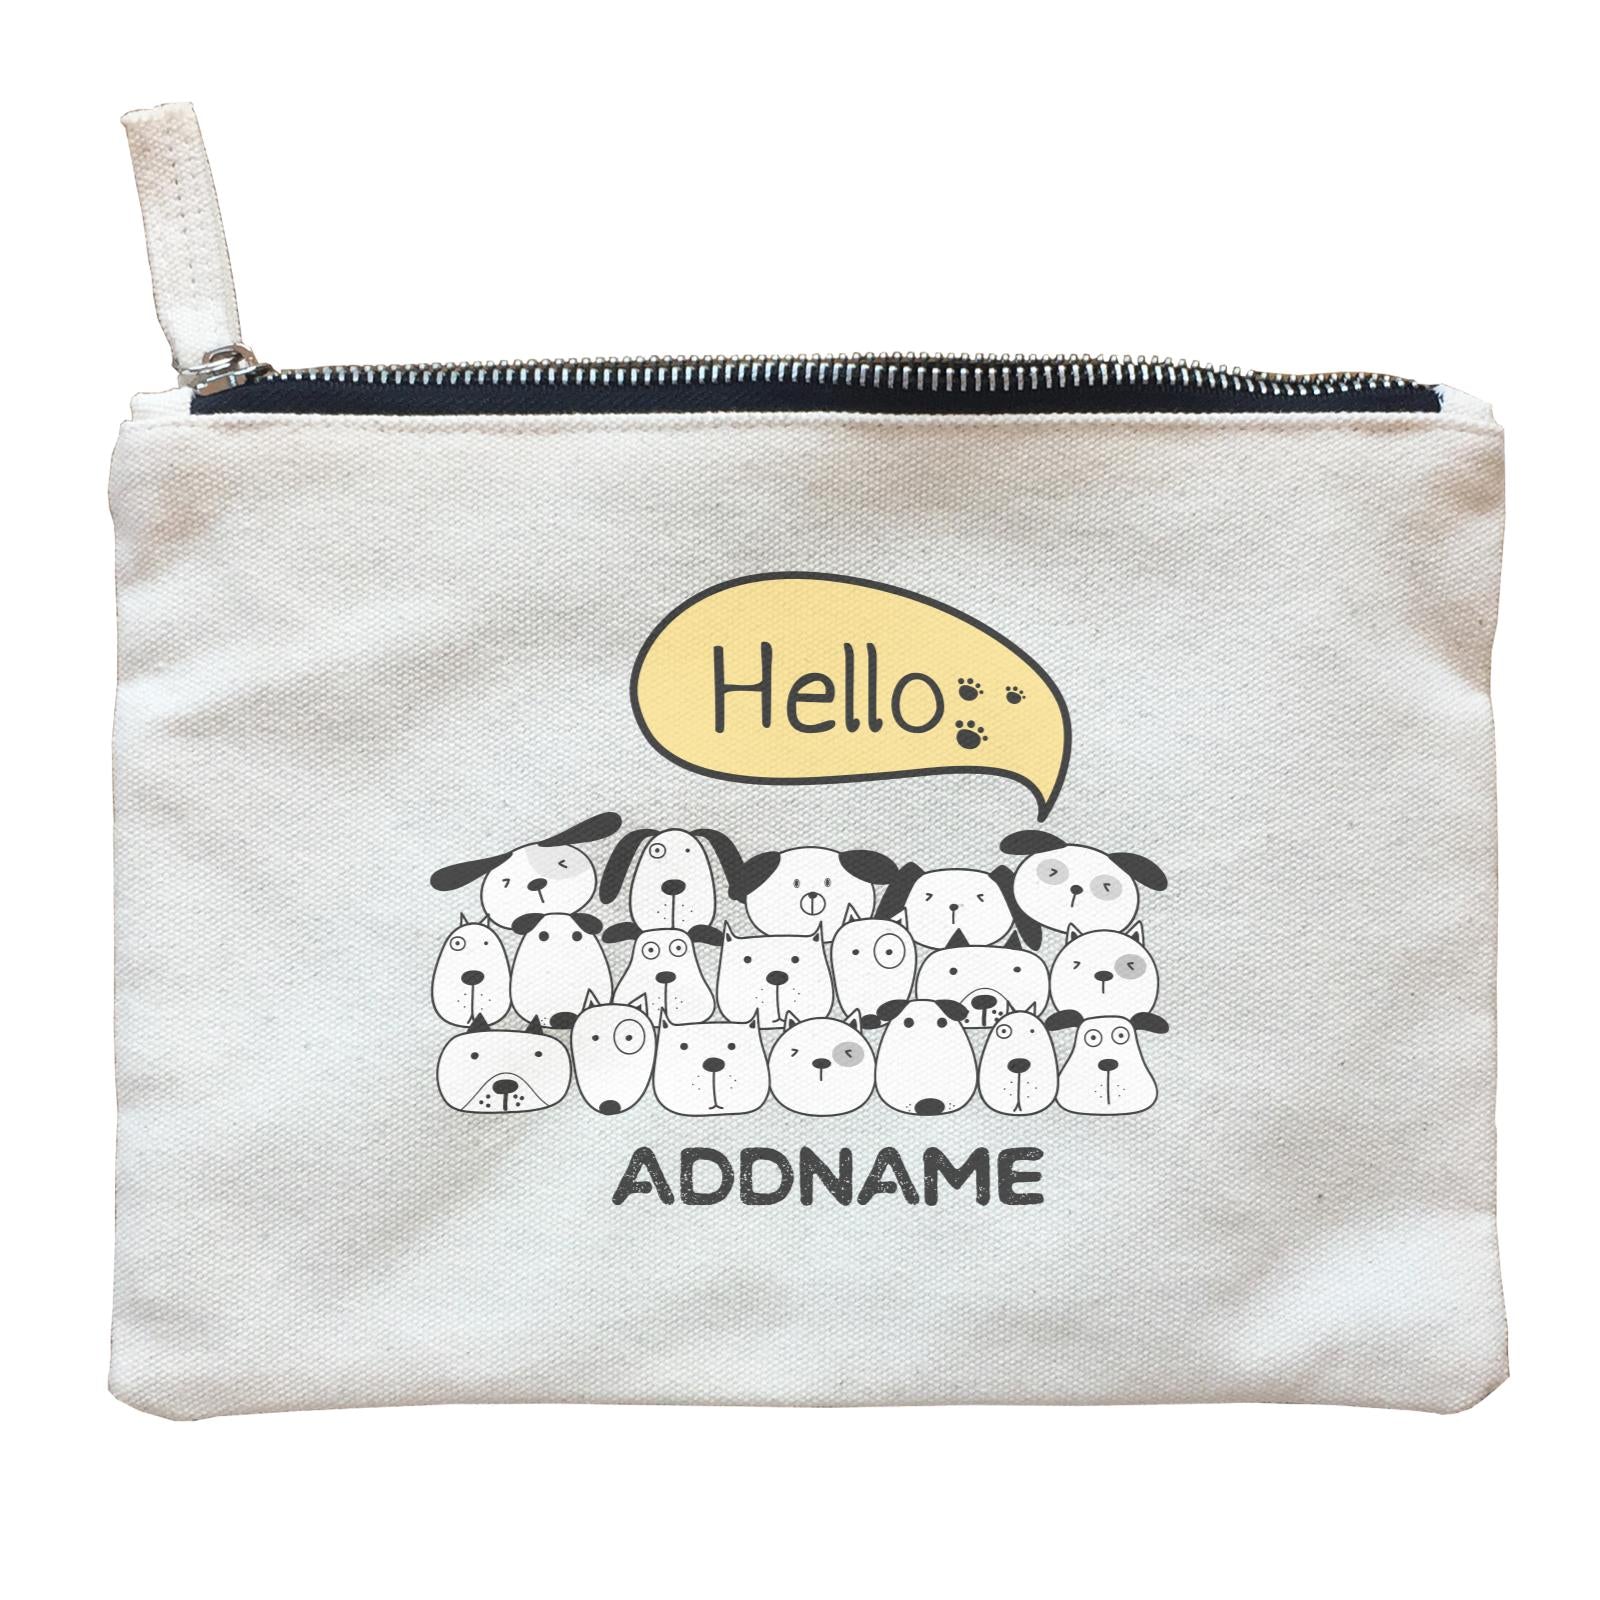 Cute Animals And Friends Series Hello Dogs Group Addname Zipper Pouch